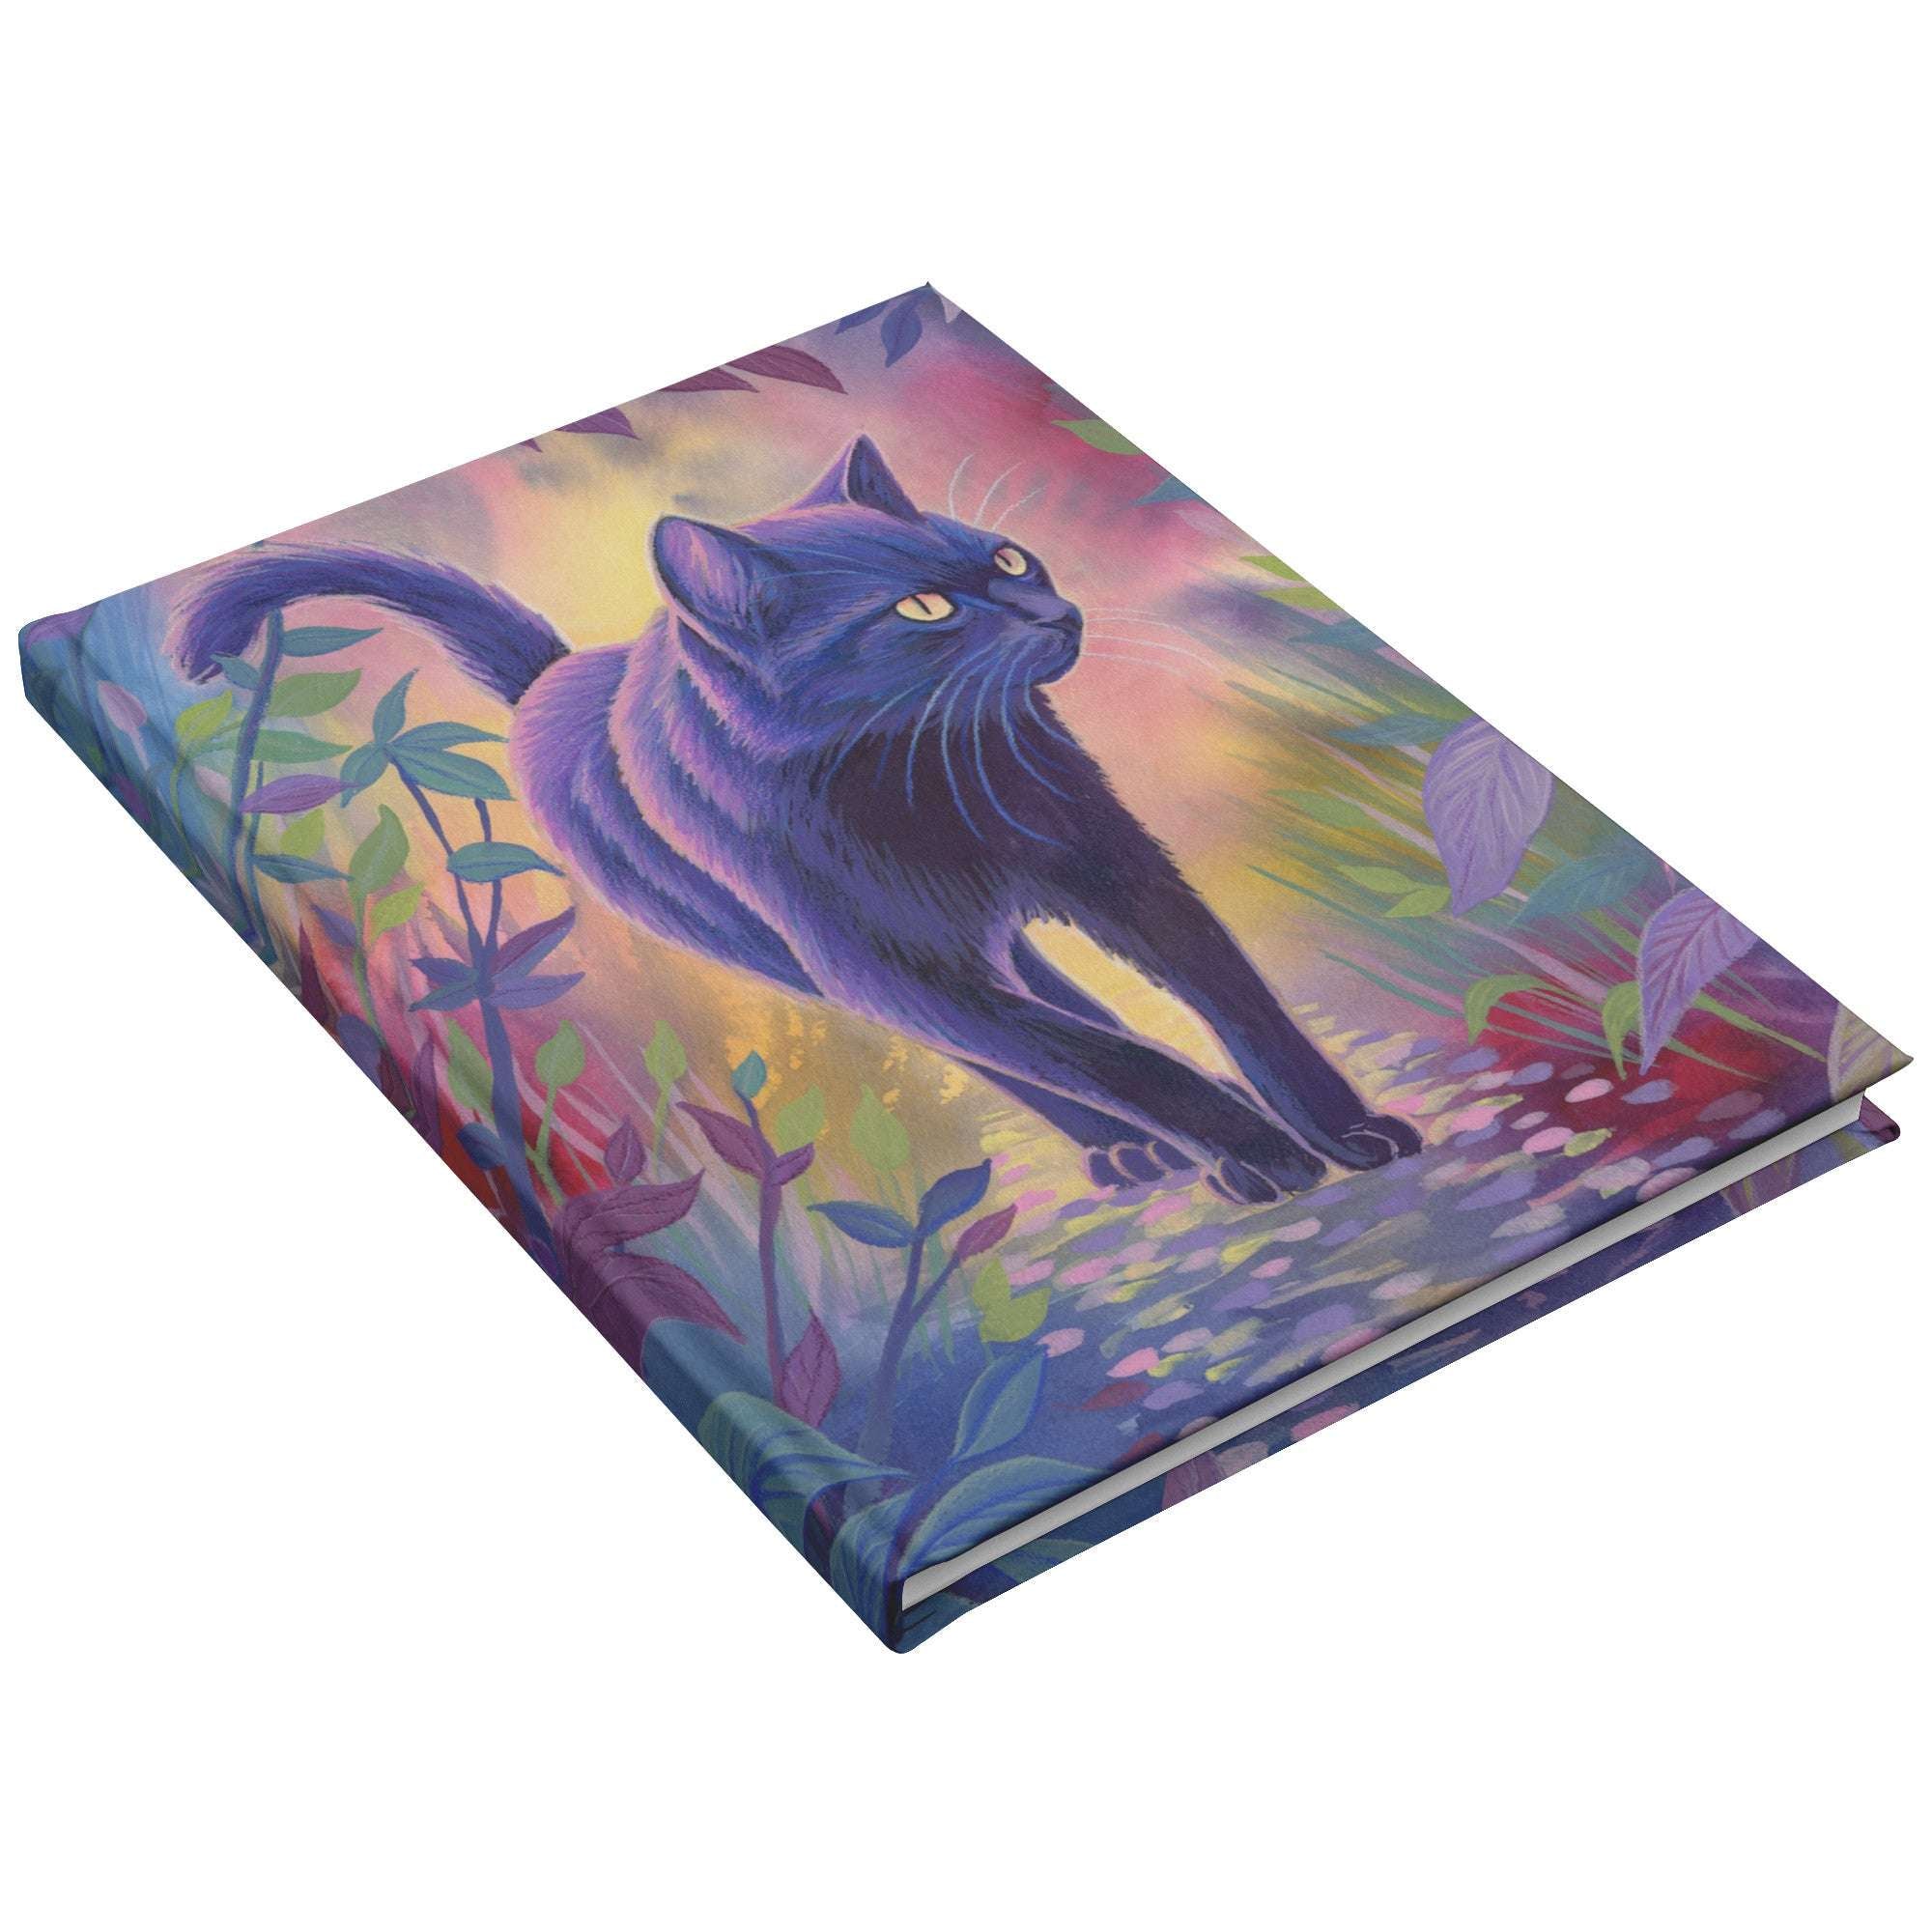 A Cat Journal with a colorful illustration of a black cat among multi-colored foliage on the cover.